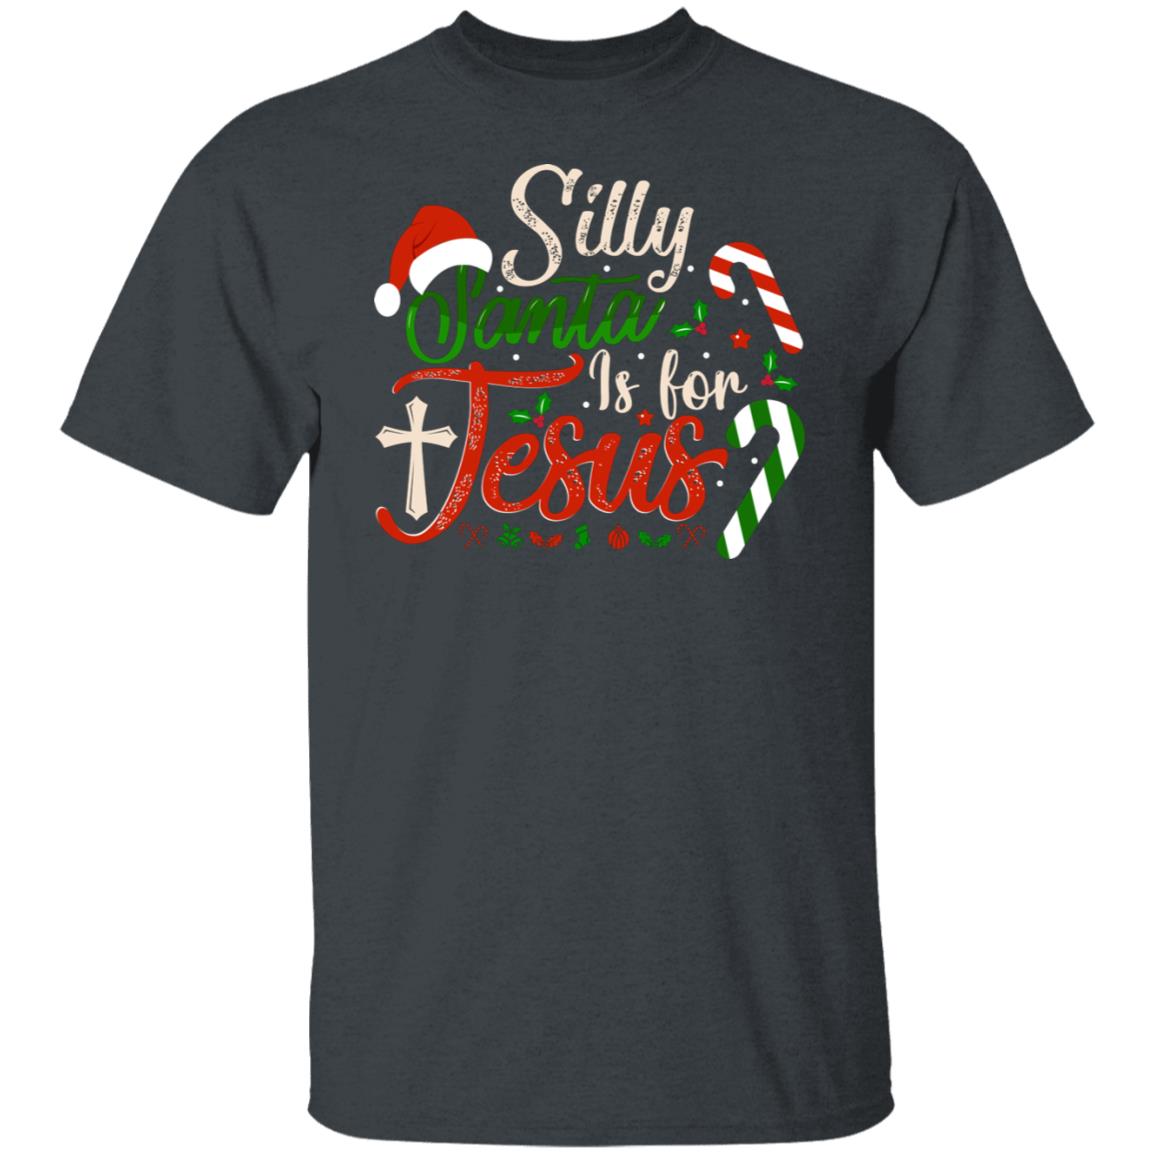 Silly Santa is For Jesus Tee Christmas Cane Shirt